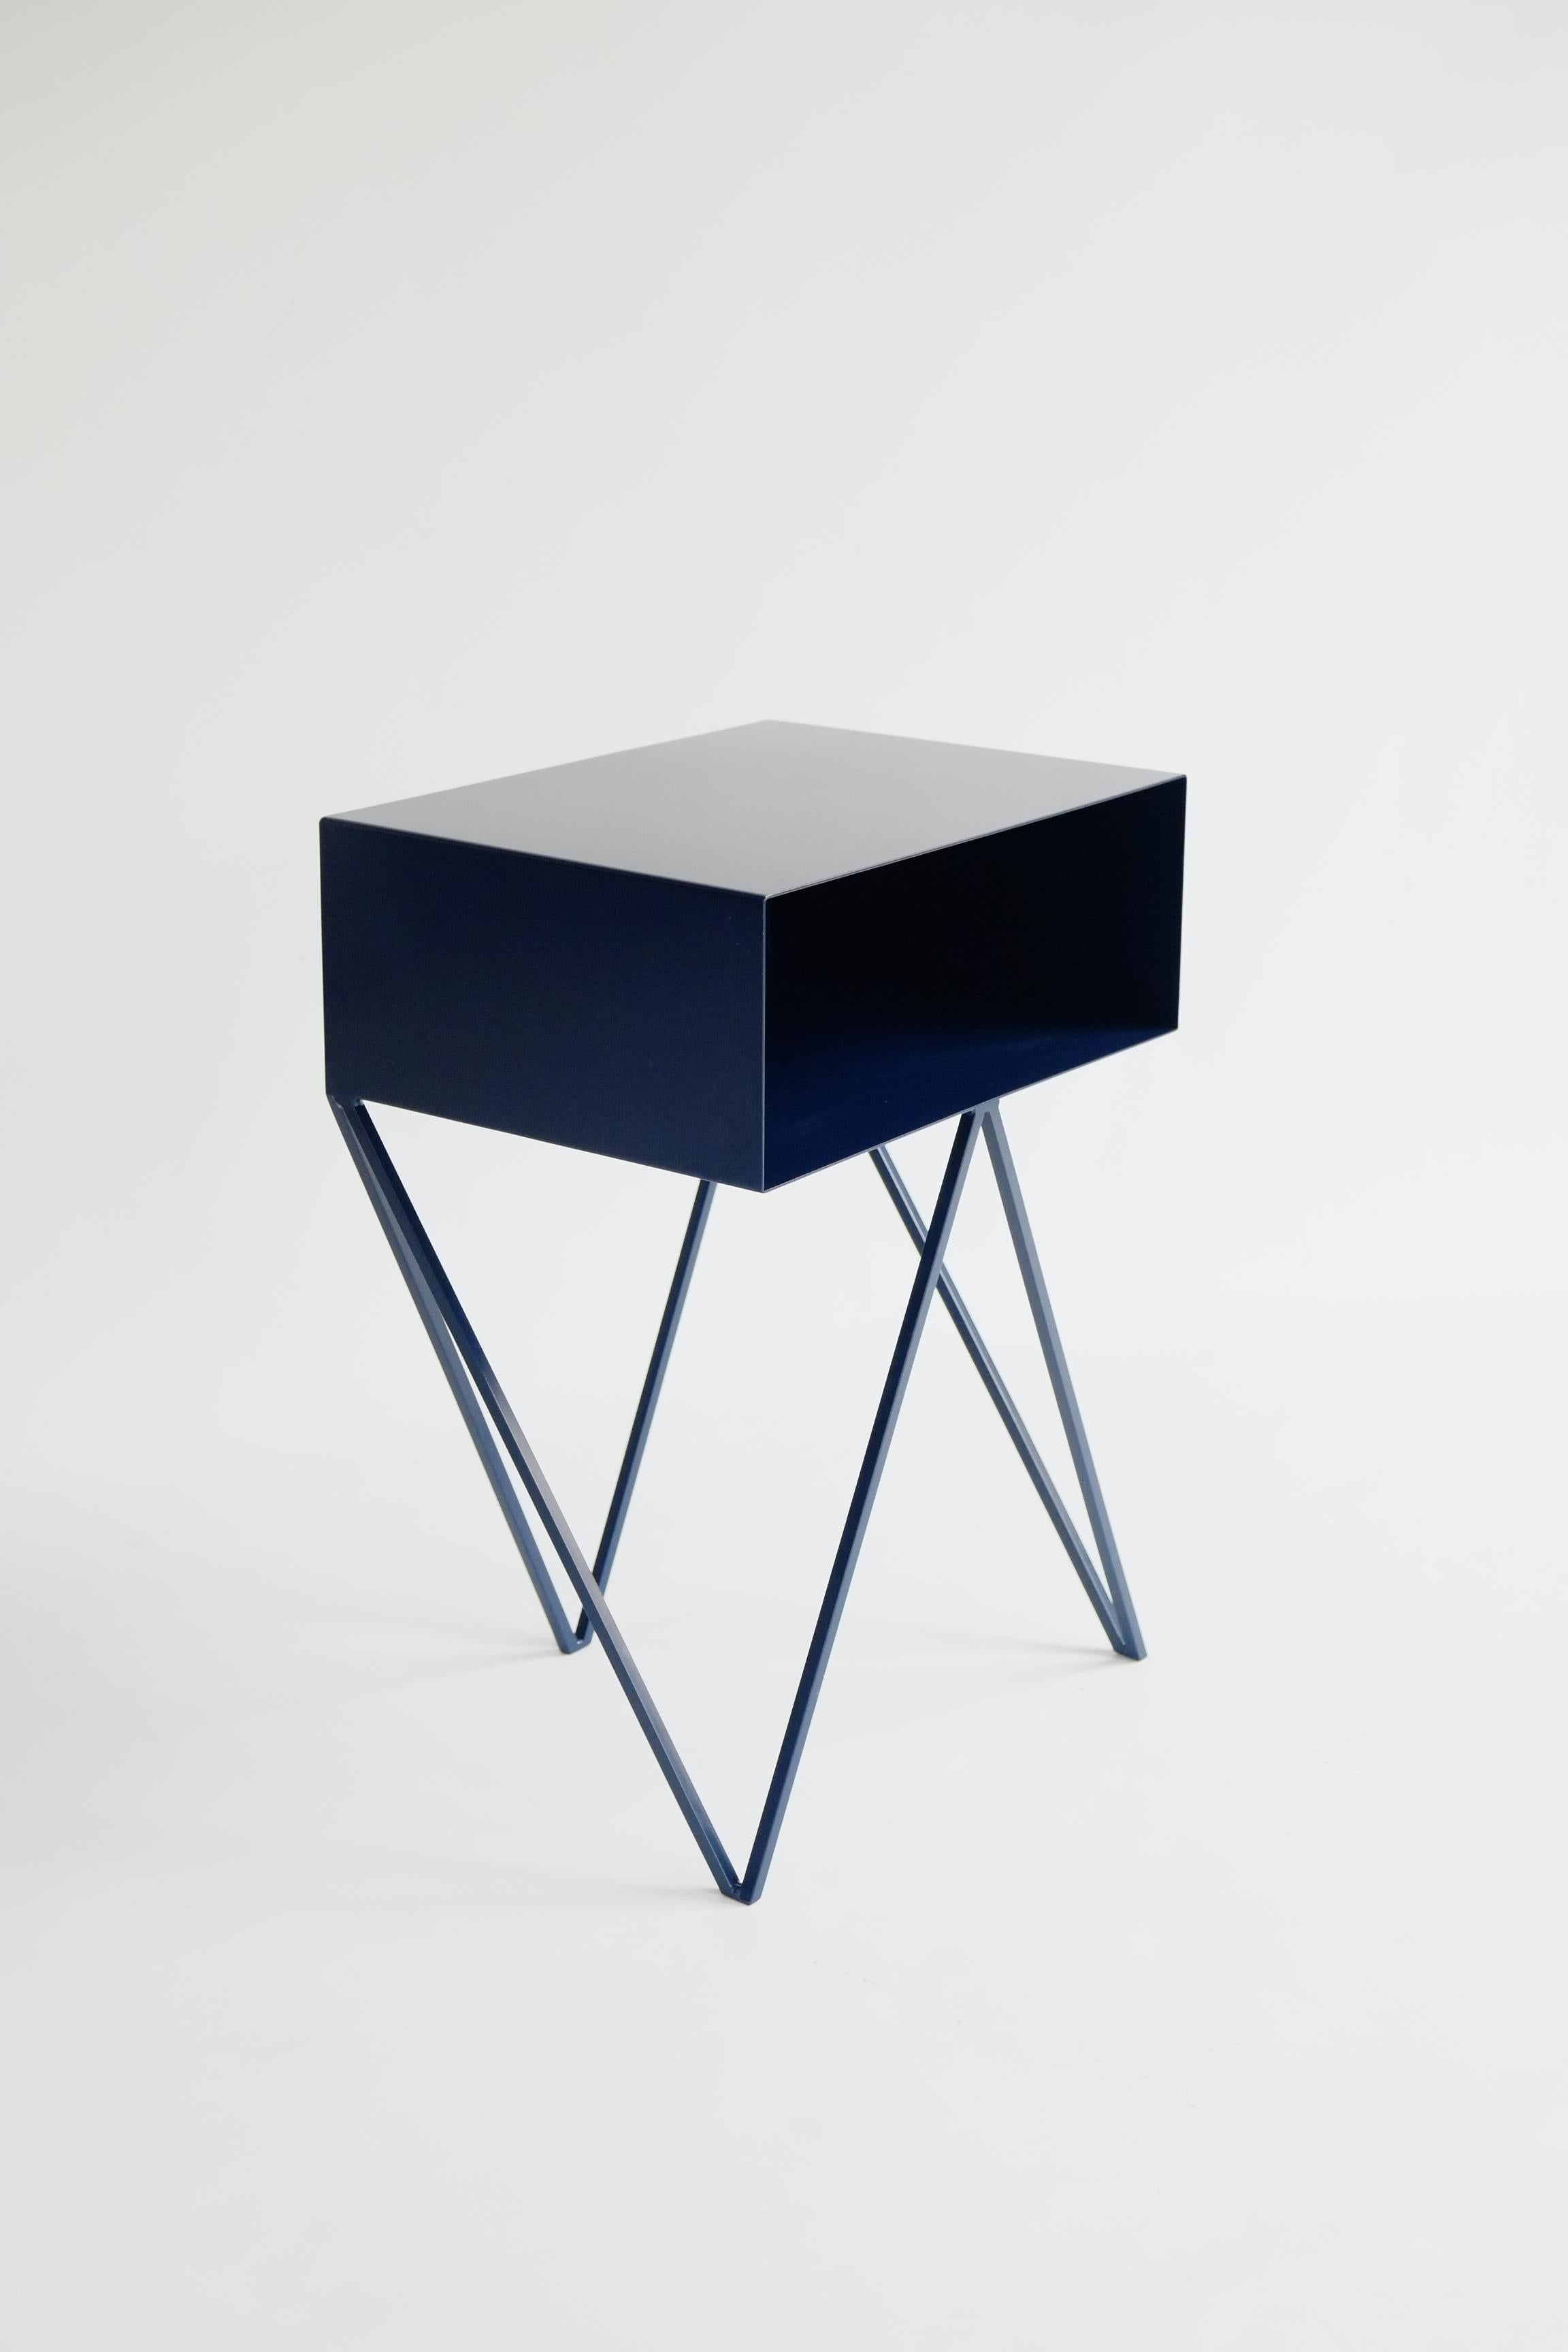 Our all-time best-seller the Robot side table features an open shelf on zig zag legs. A fun and functional design made of solid steel, powder-coated in dark blue. The clean lines look great against period details as well as in modern spaces. Perfect